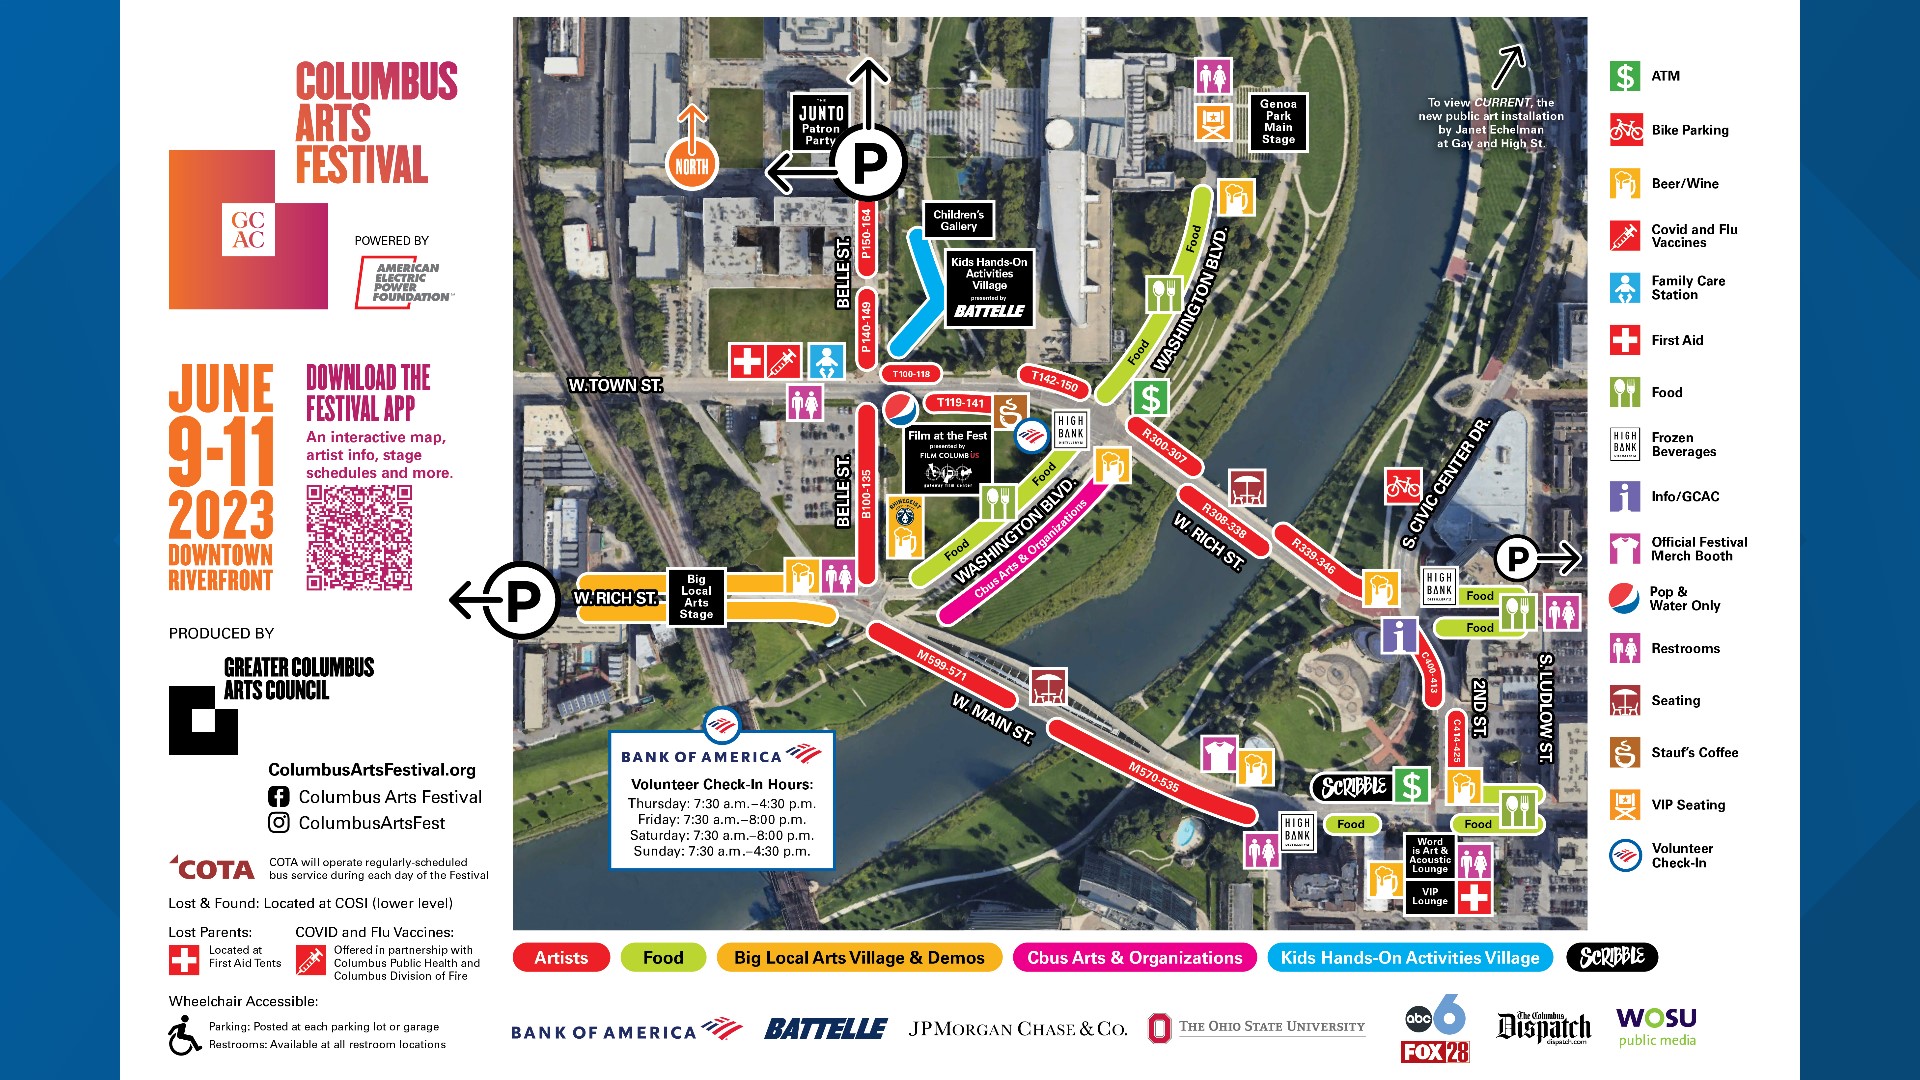 Patrons will be able to park along the Scioto Mile and in surrounding garages.